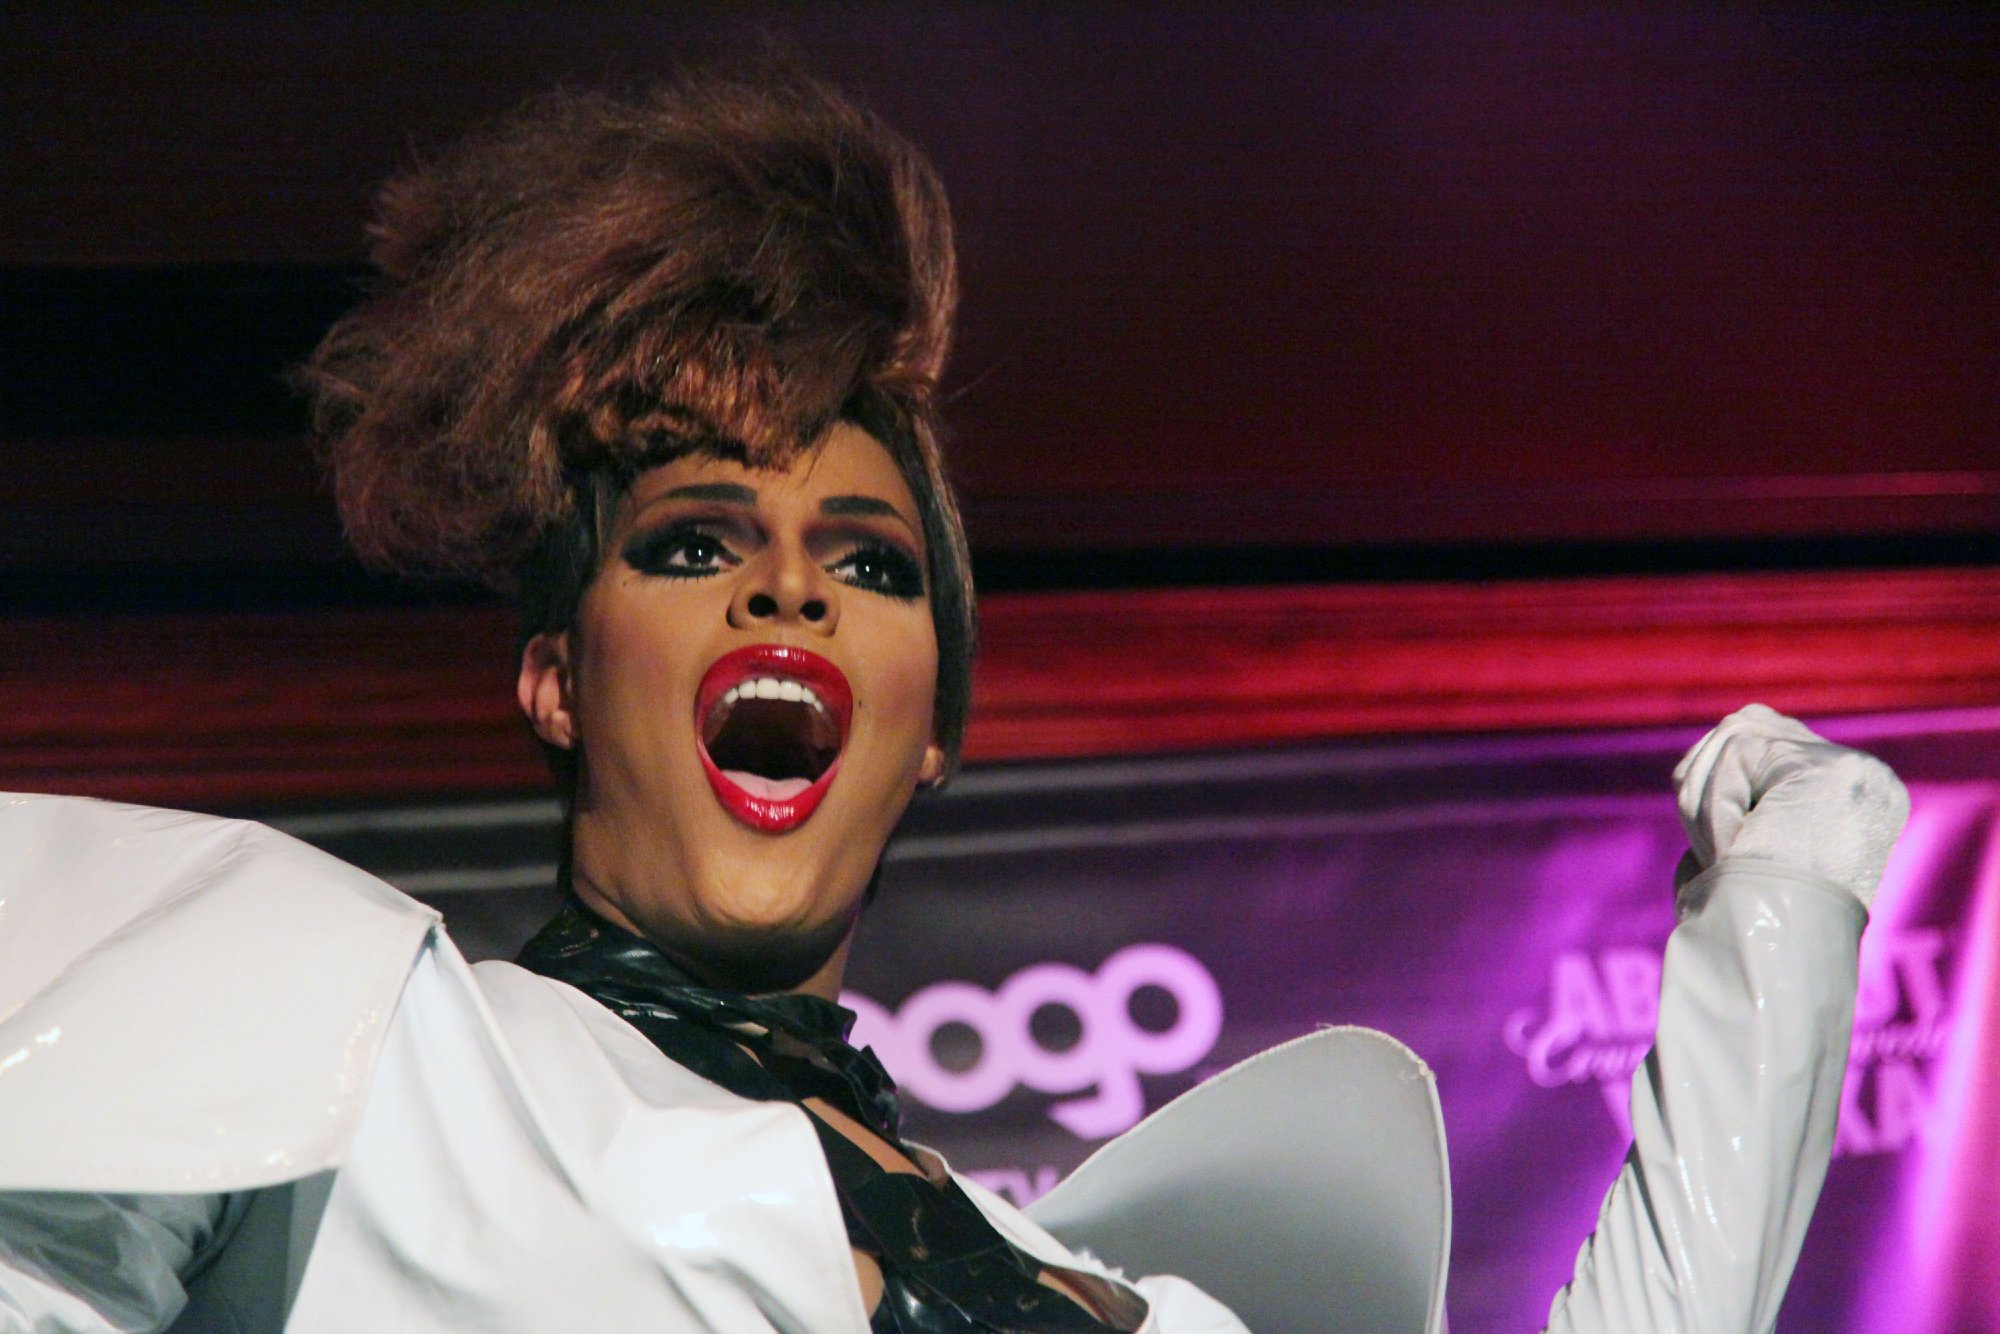 'RuPaul's Drag Race' Season 2 winner Tyra Sanchez, now known as James Ross wearing black and white at the finale